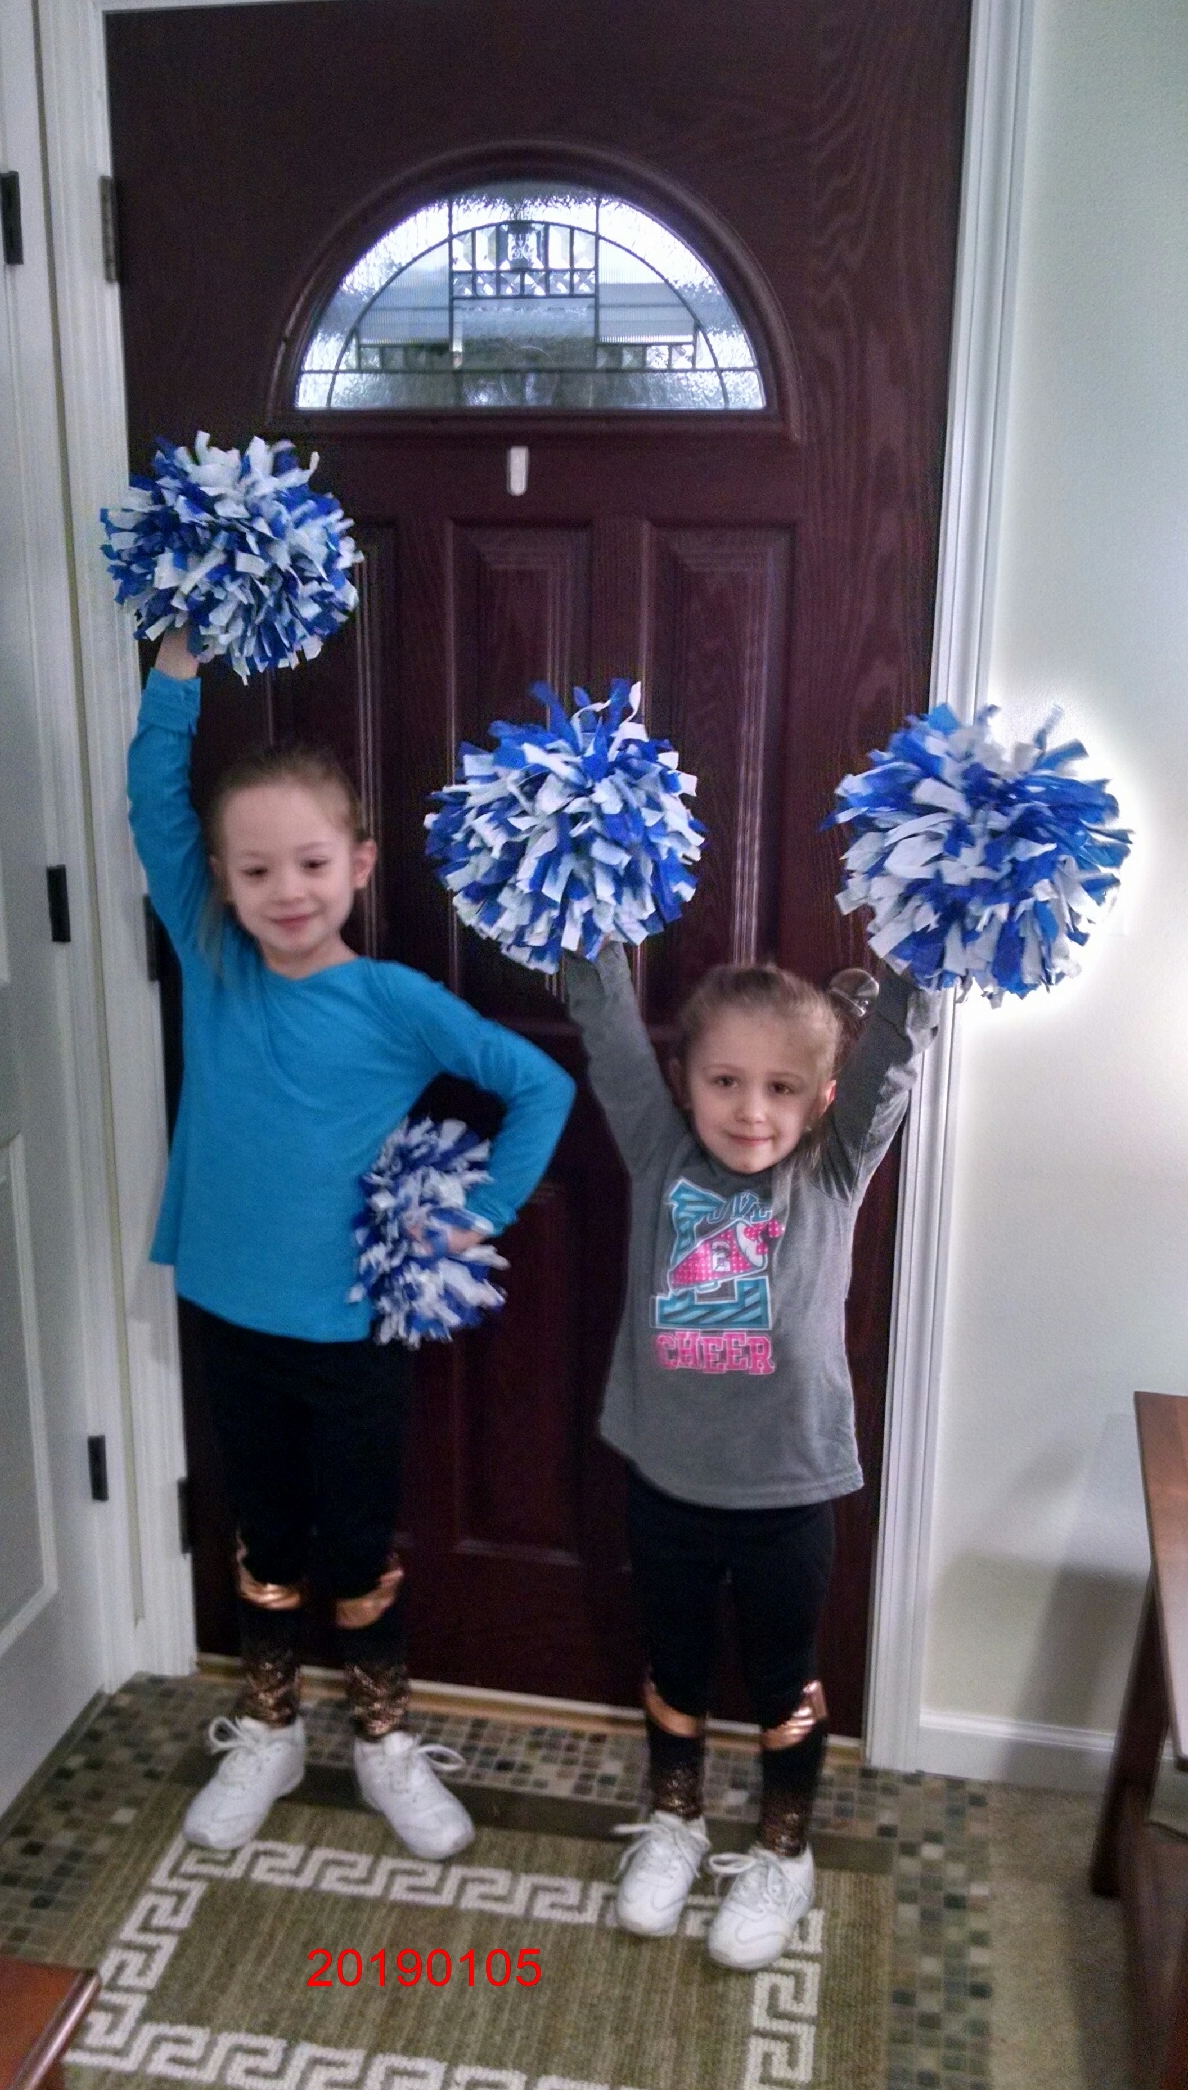 Jan 05, 2019 Ella and Paisley 1st Cheer Practice for the season.